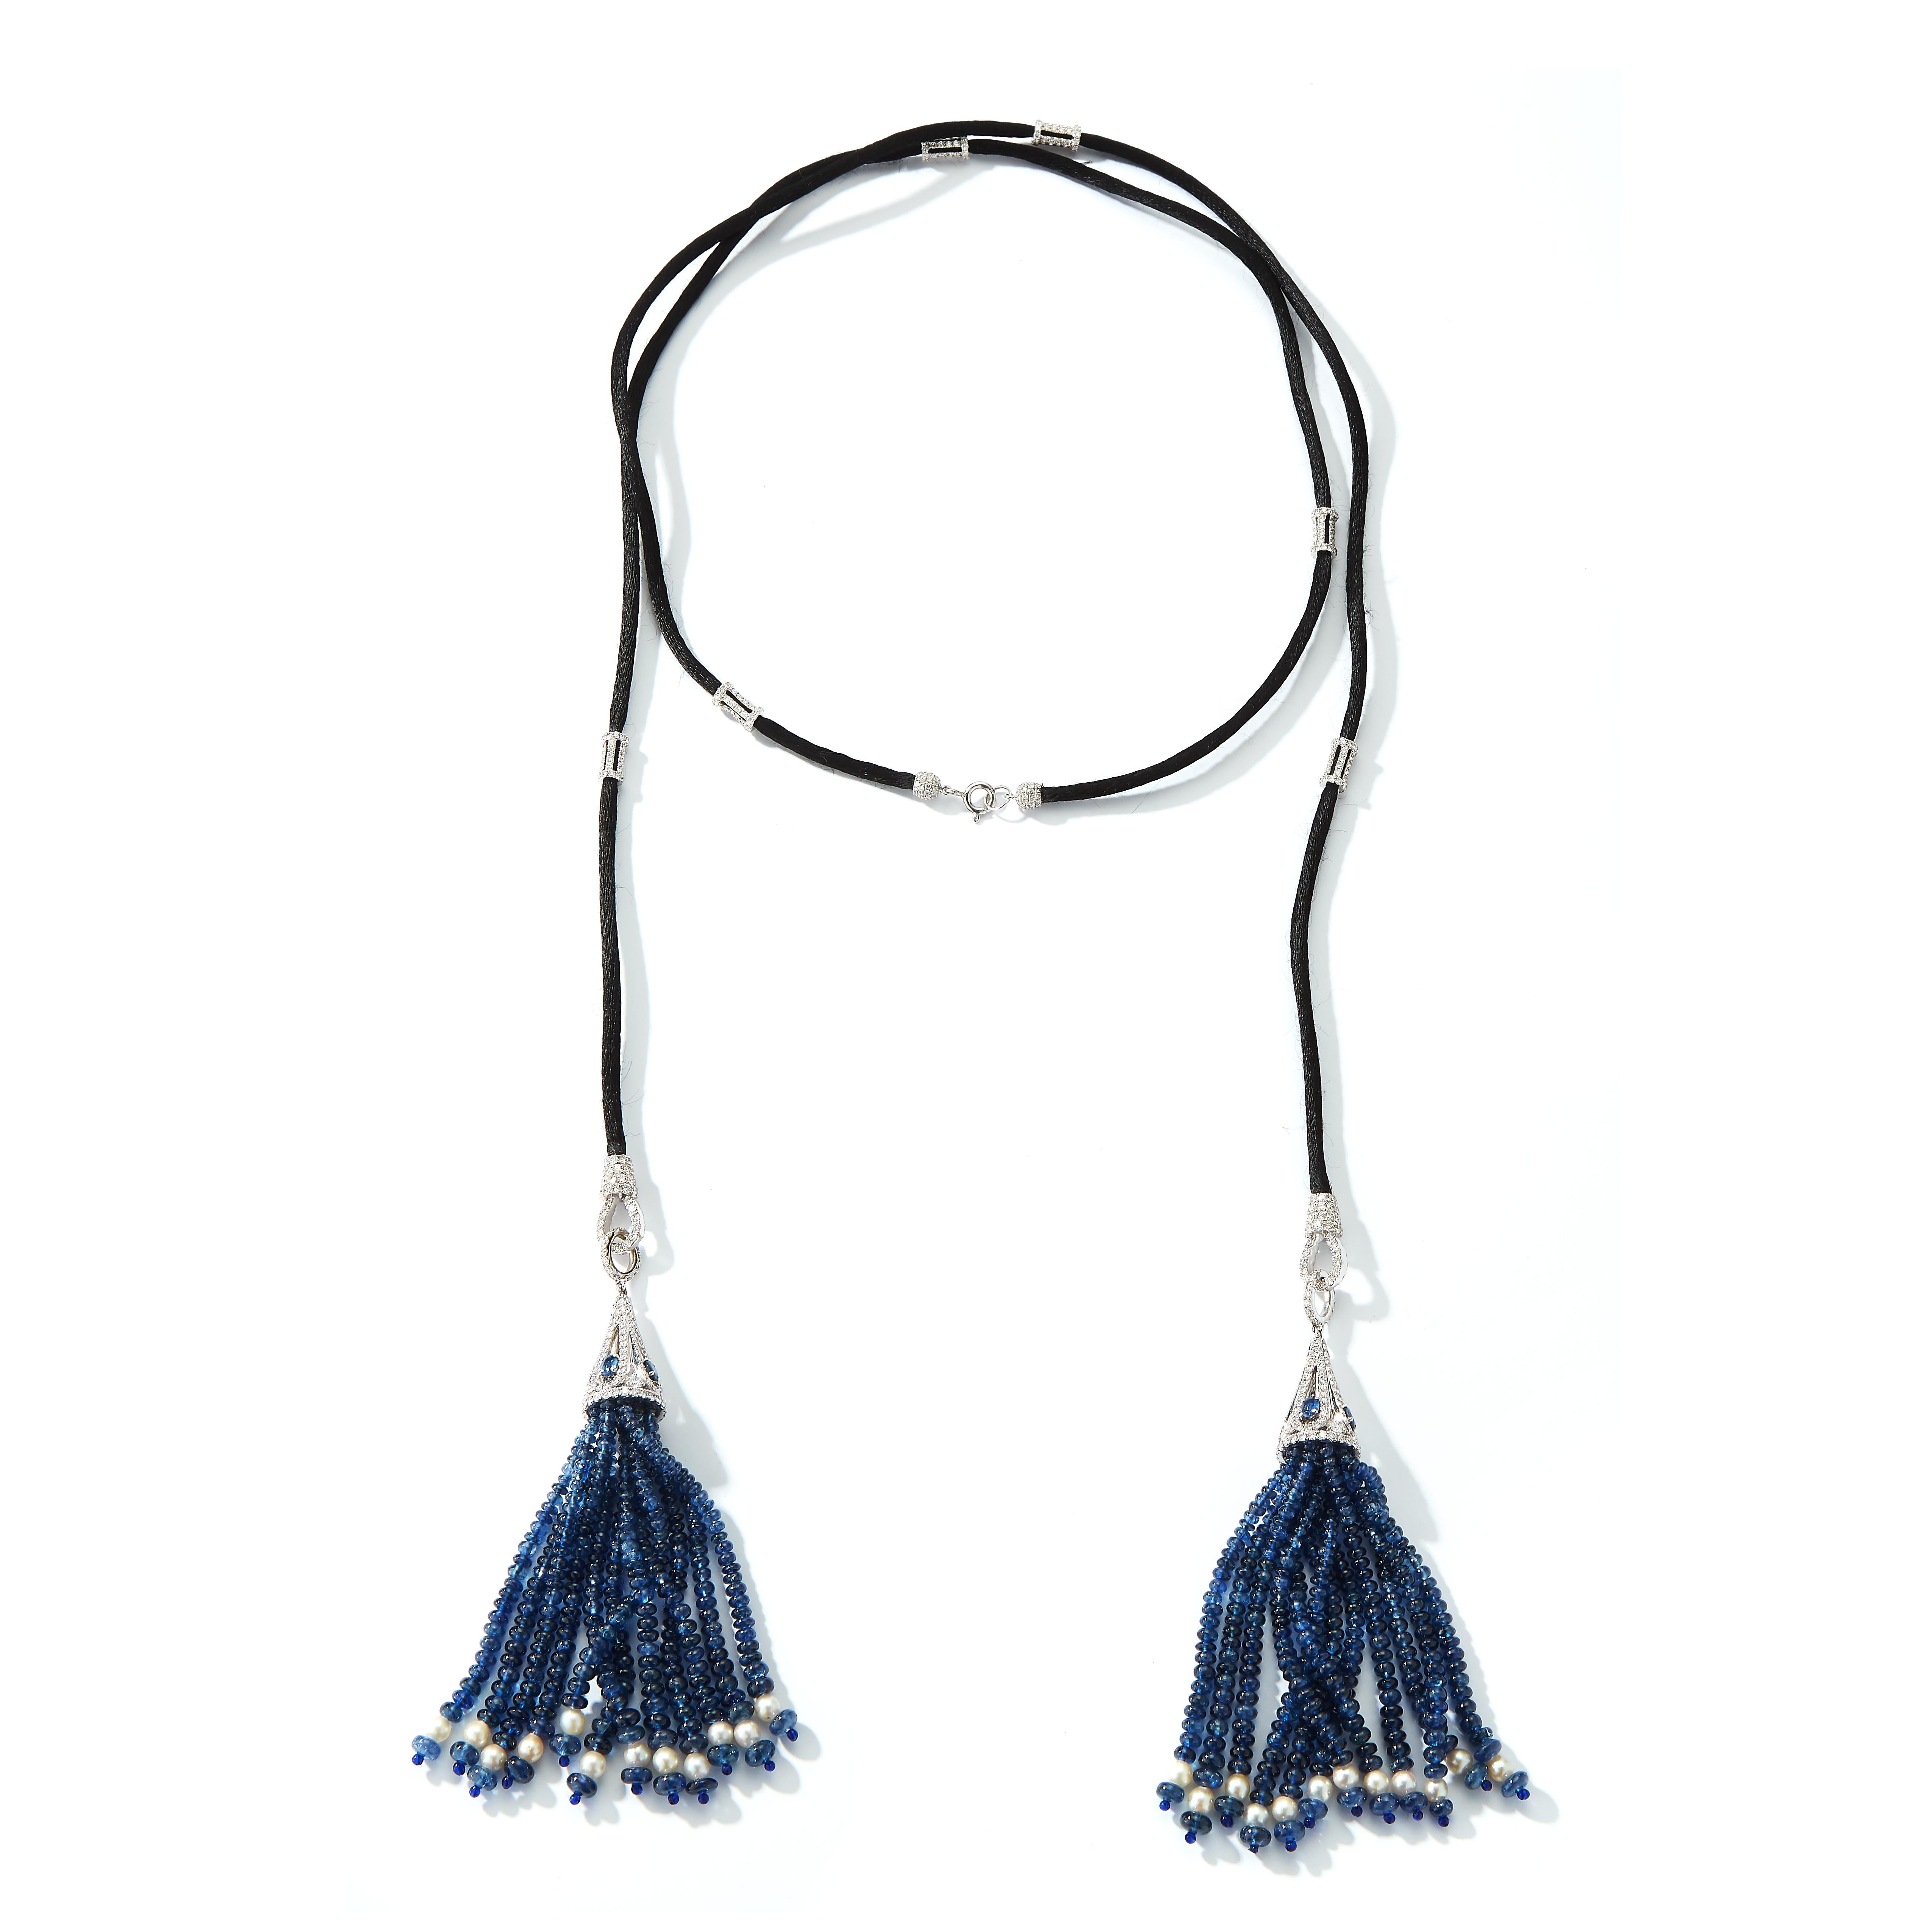 Sapphire & Diamond Tassel Lariat Necklace with diamond spacers set on silk

Approximately 7.07 carats of diamonds
Approximately 144.88 carats of sapphires

Measurements: 42